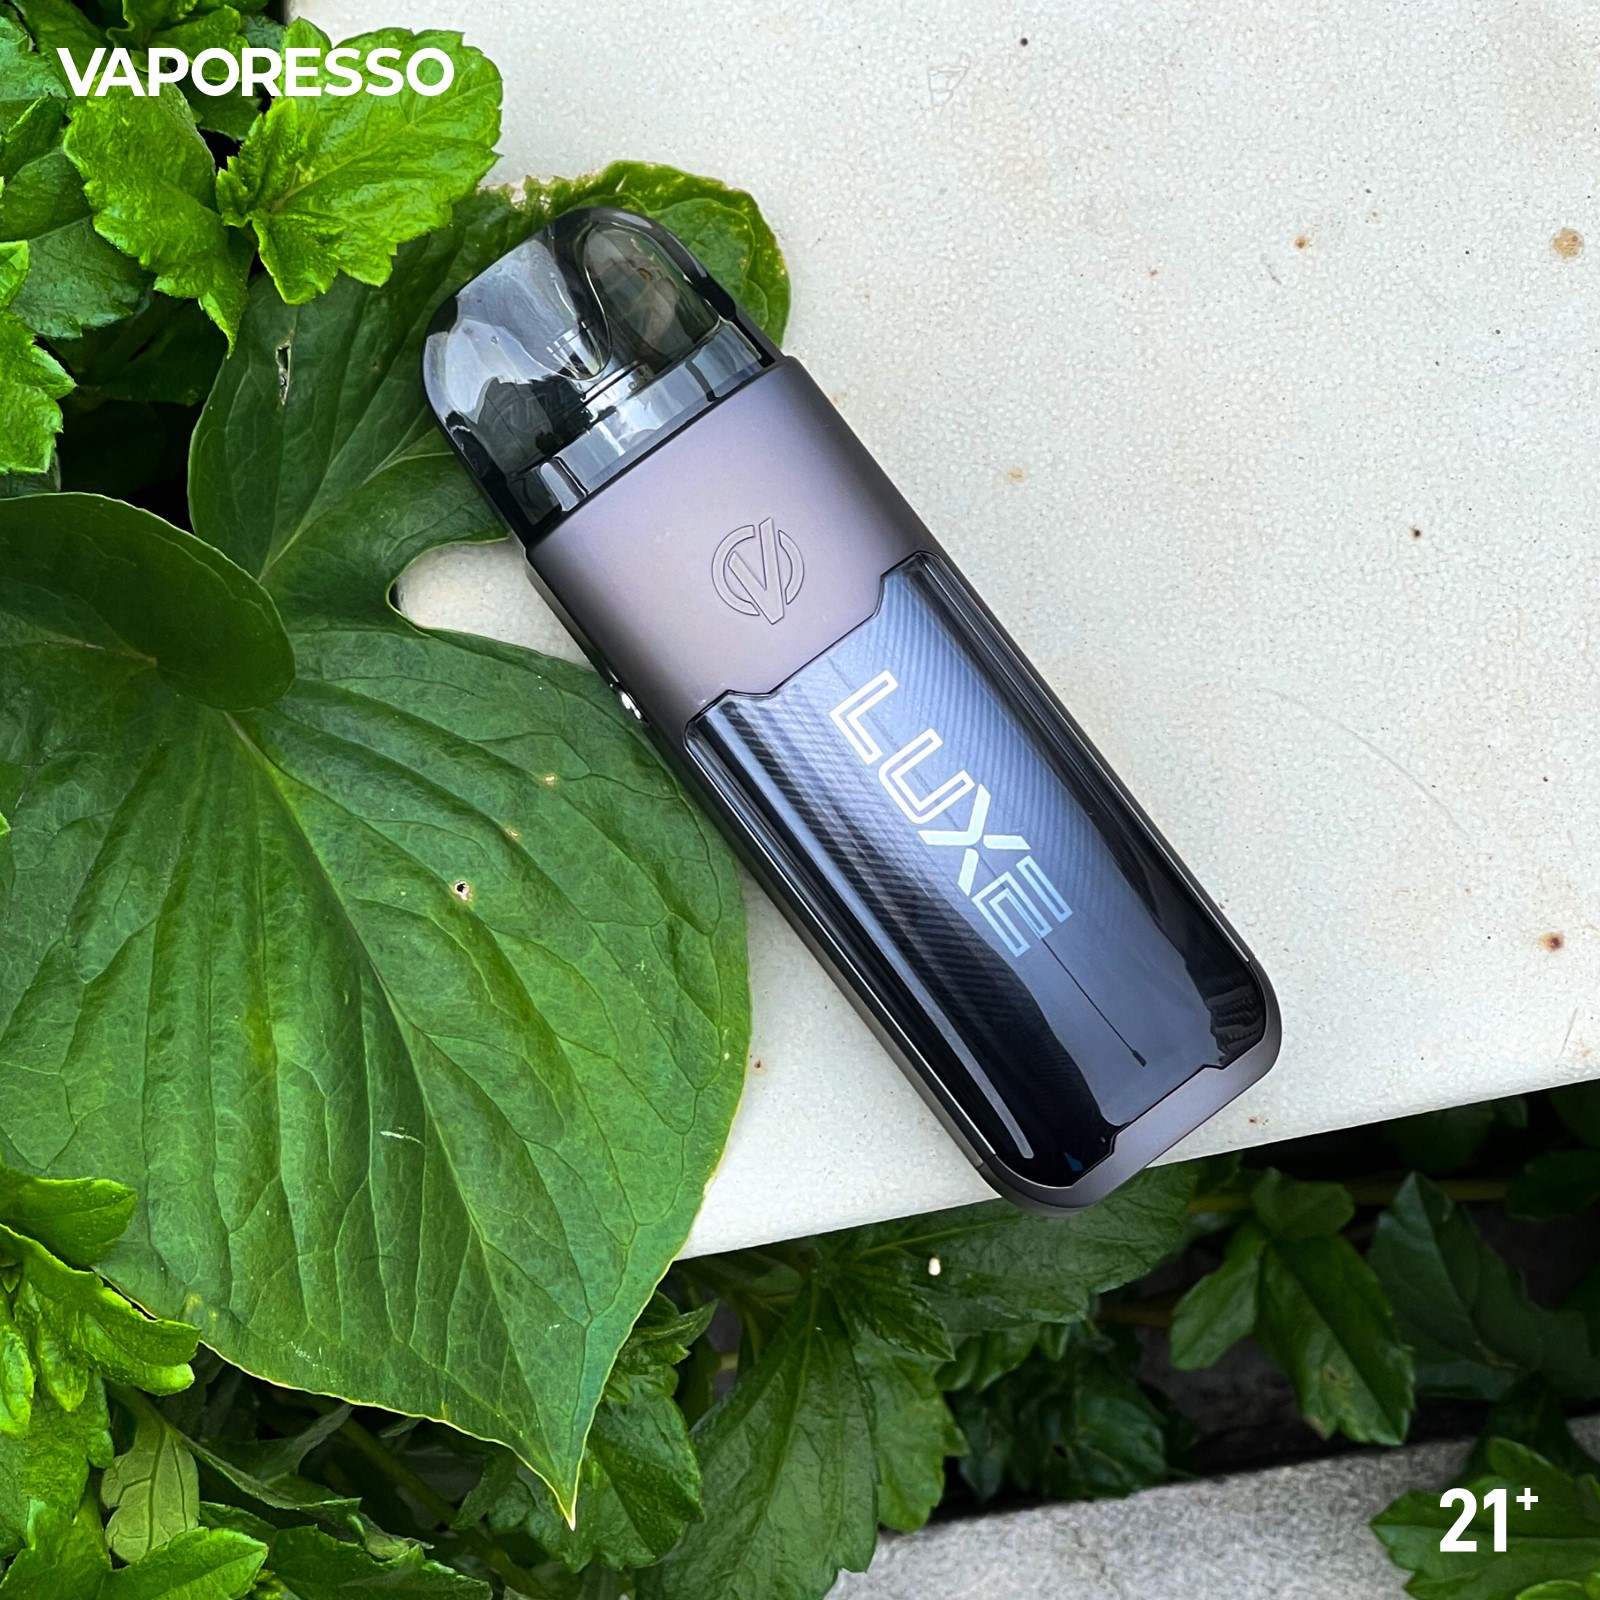 Vaporesso Vaping Adventures: Flavorful Journeys and Cloudy Discoveries Unveiled